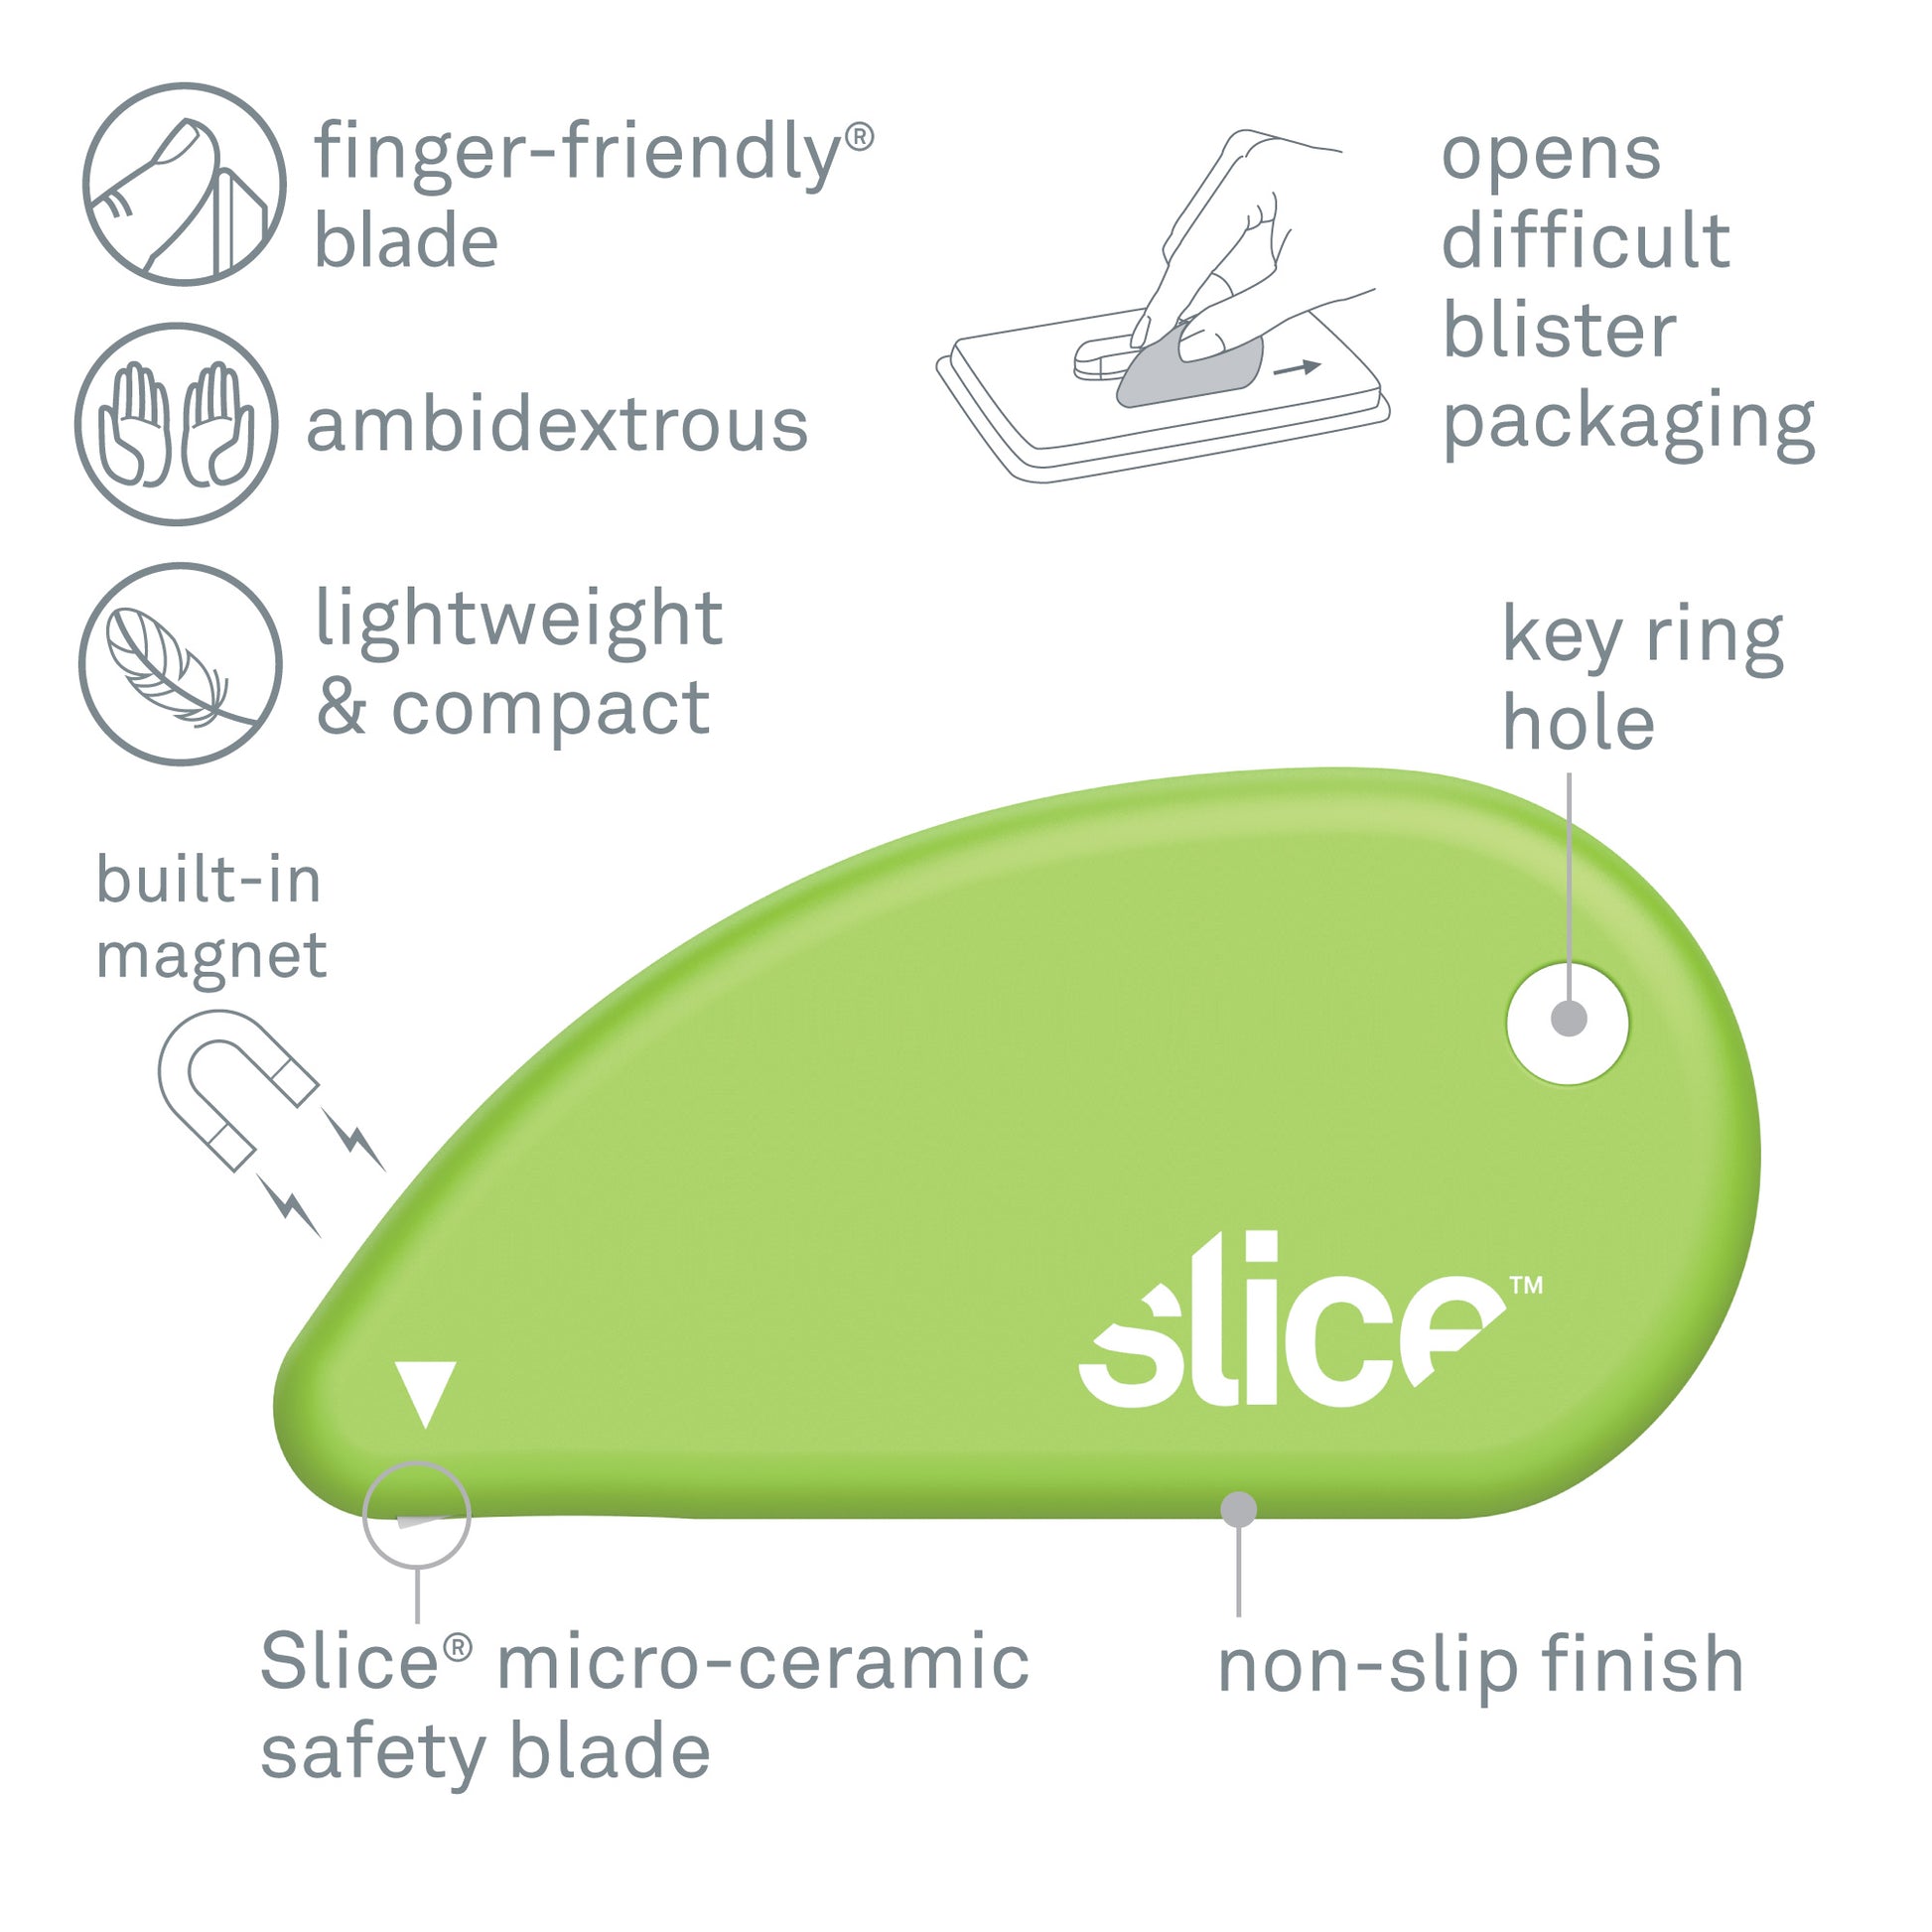 Slice 00100 Ceramic Blade Safety Cutter, Opens Clamshell Packaging, Coupon  Cutter, Trim Photos, Scrapbooking, Fits Keychain, Green